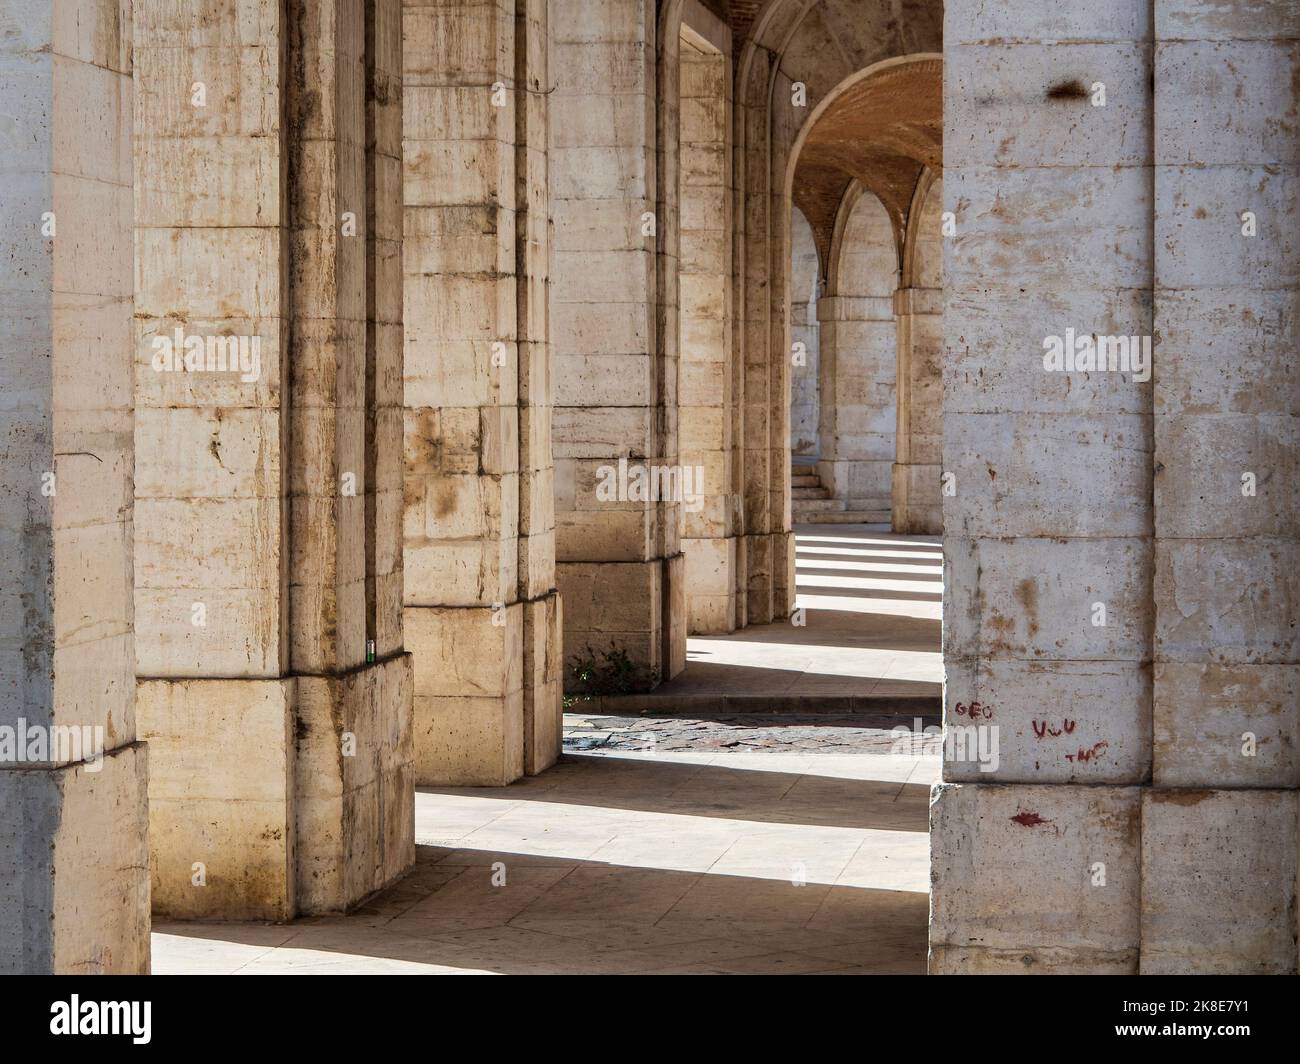 Stone arches in the corridors of the palace of Aranjuez Stock Photo